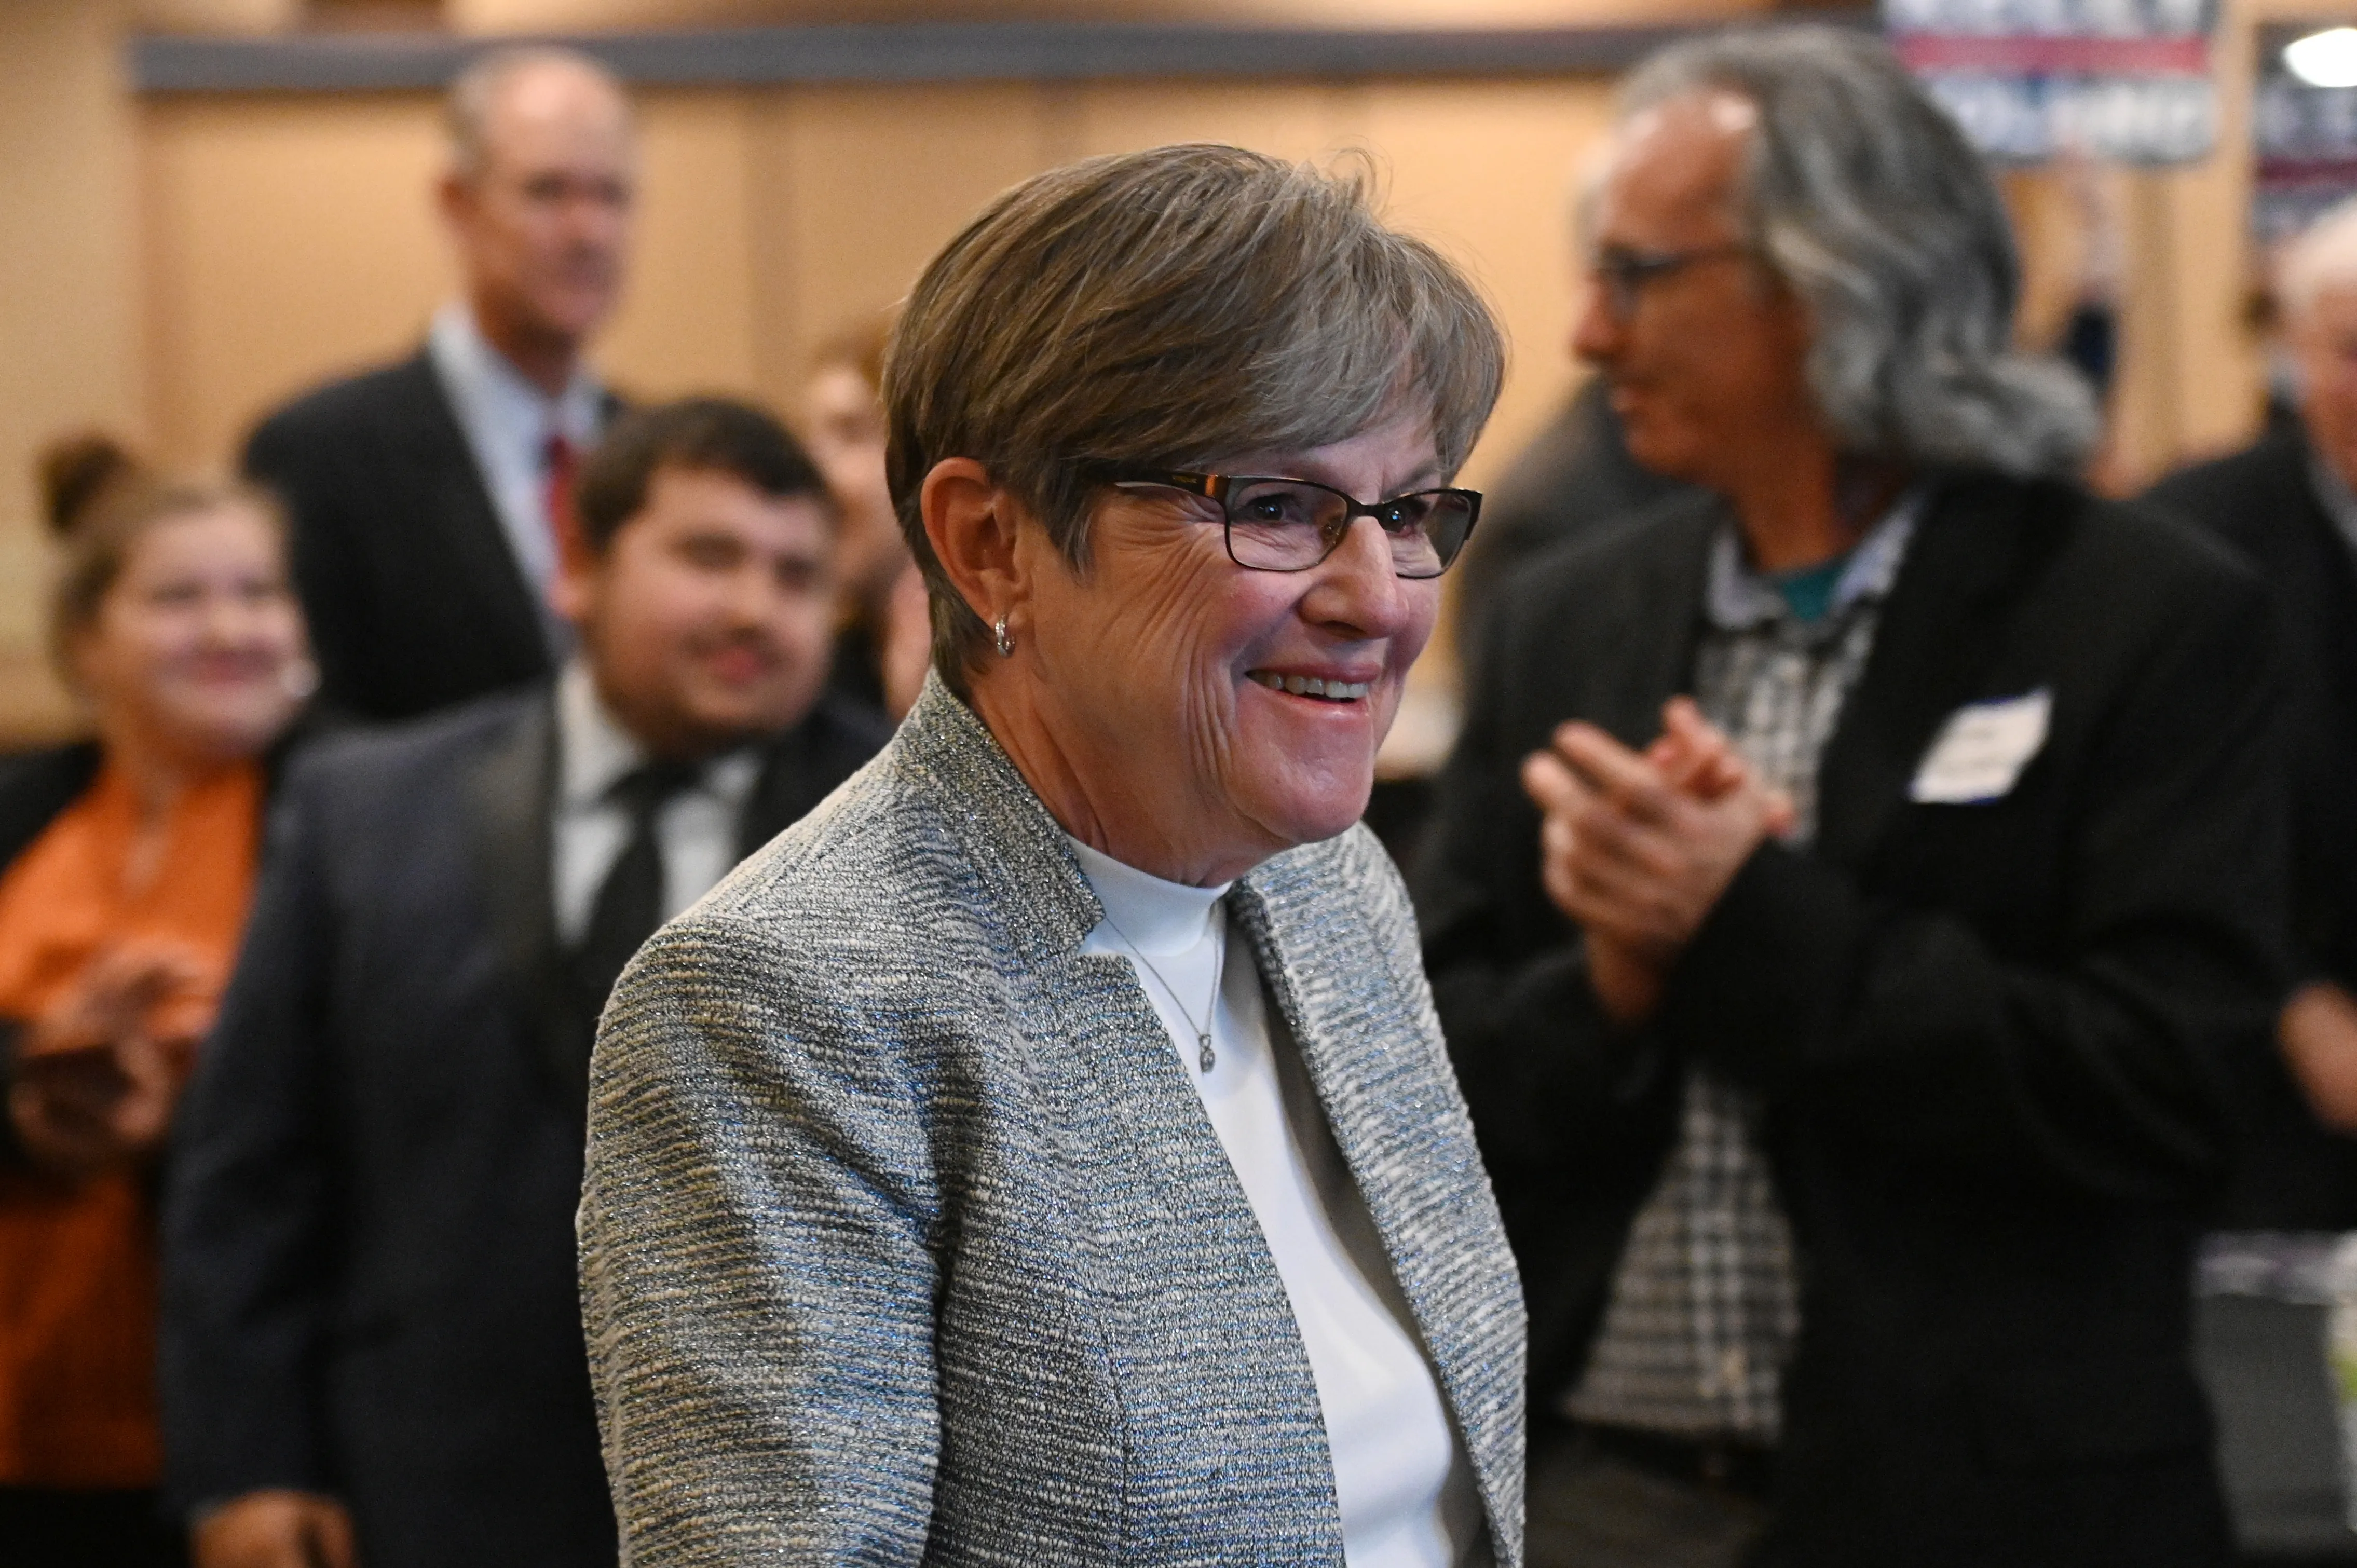 Democratic Gov. Laura Kelly arrives to address the crowd during her watch party at the Ramada Hotel Downtown Topeka on Nov. 8, 2022, in Topeka, Kansas.?w=200&h=150